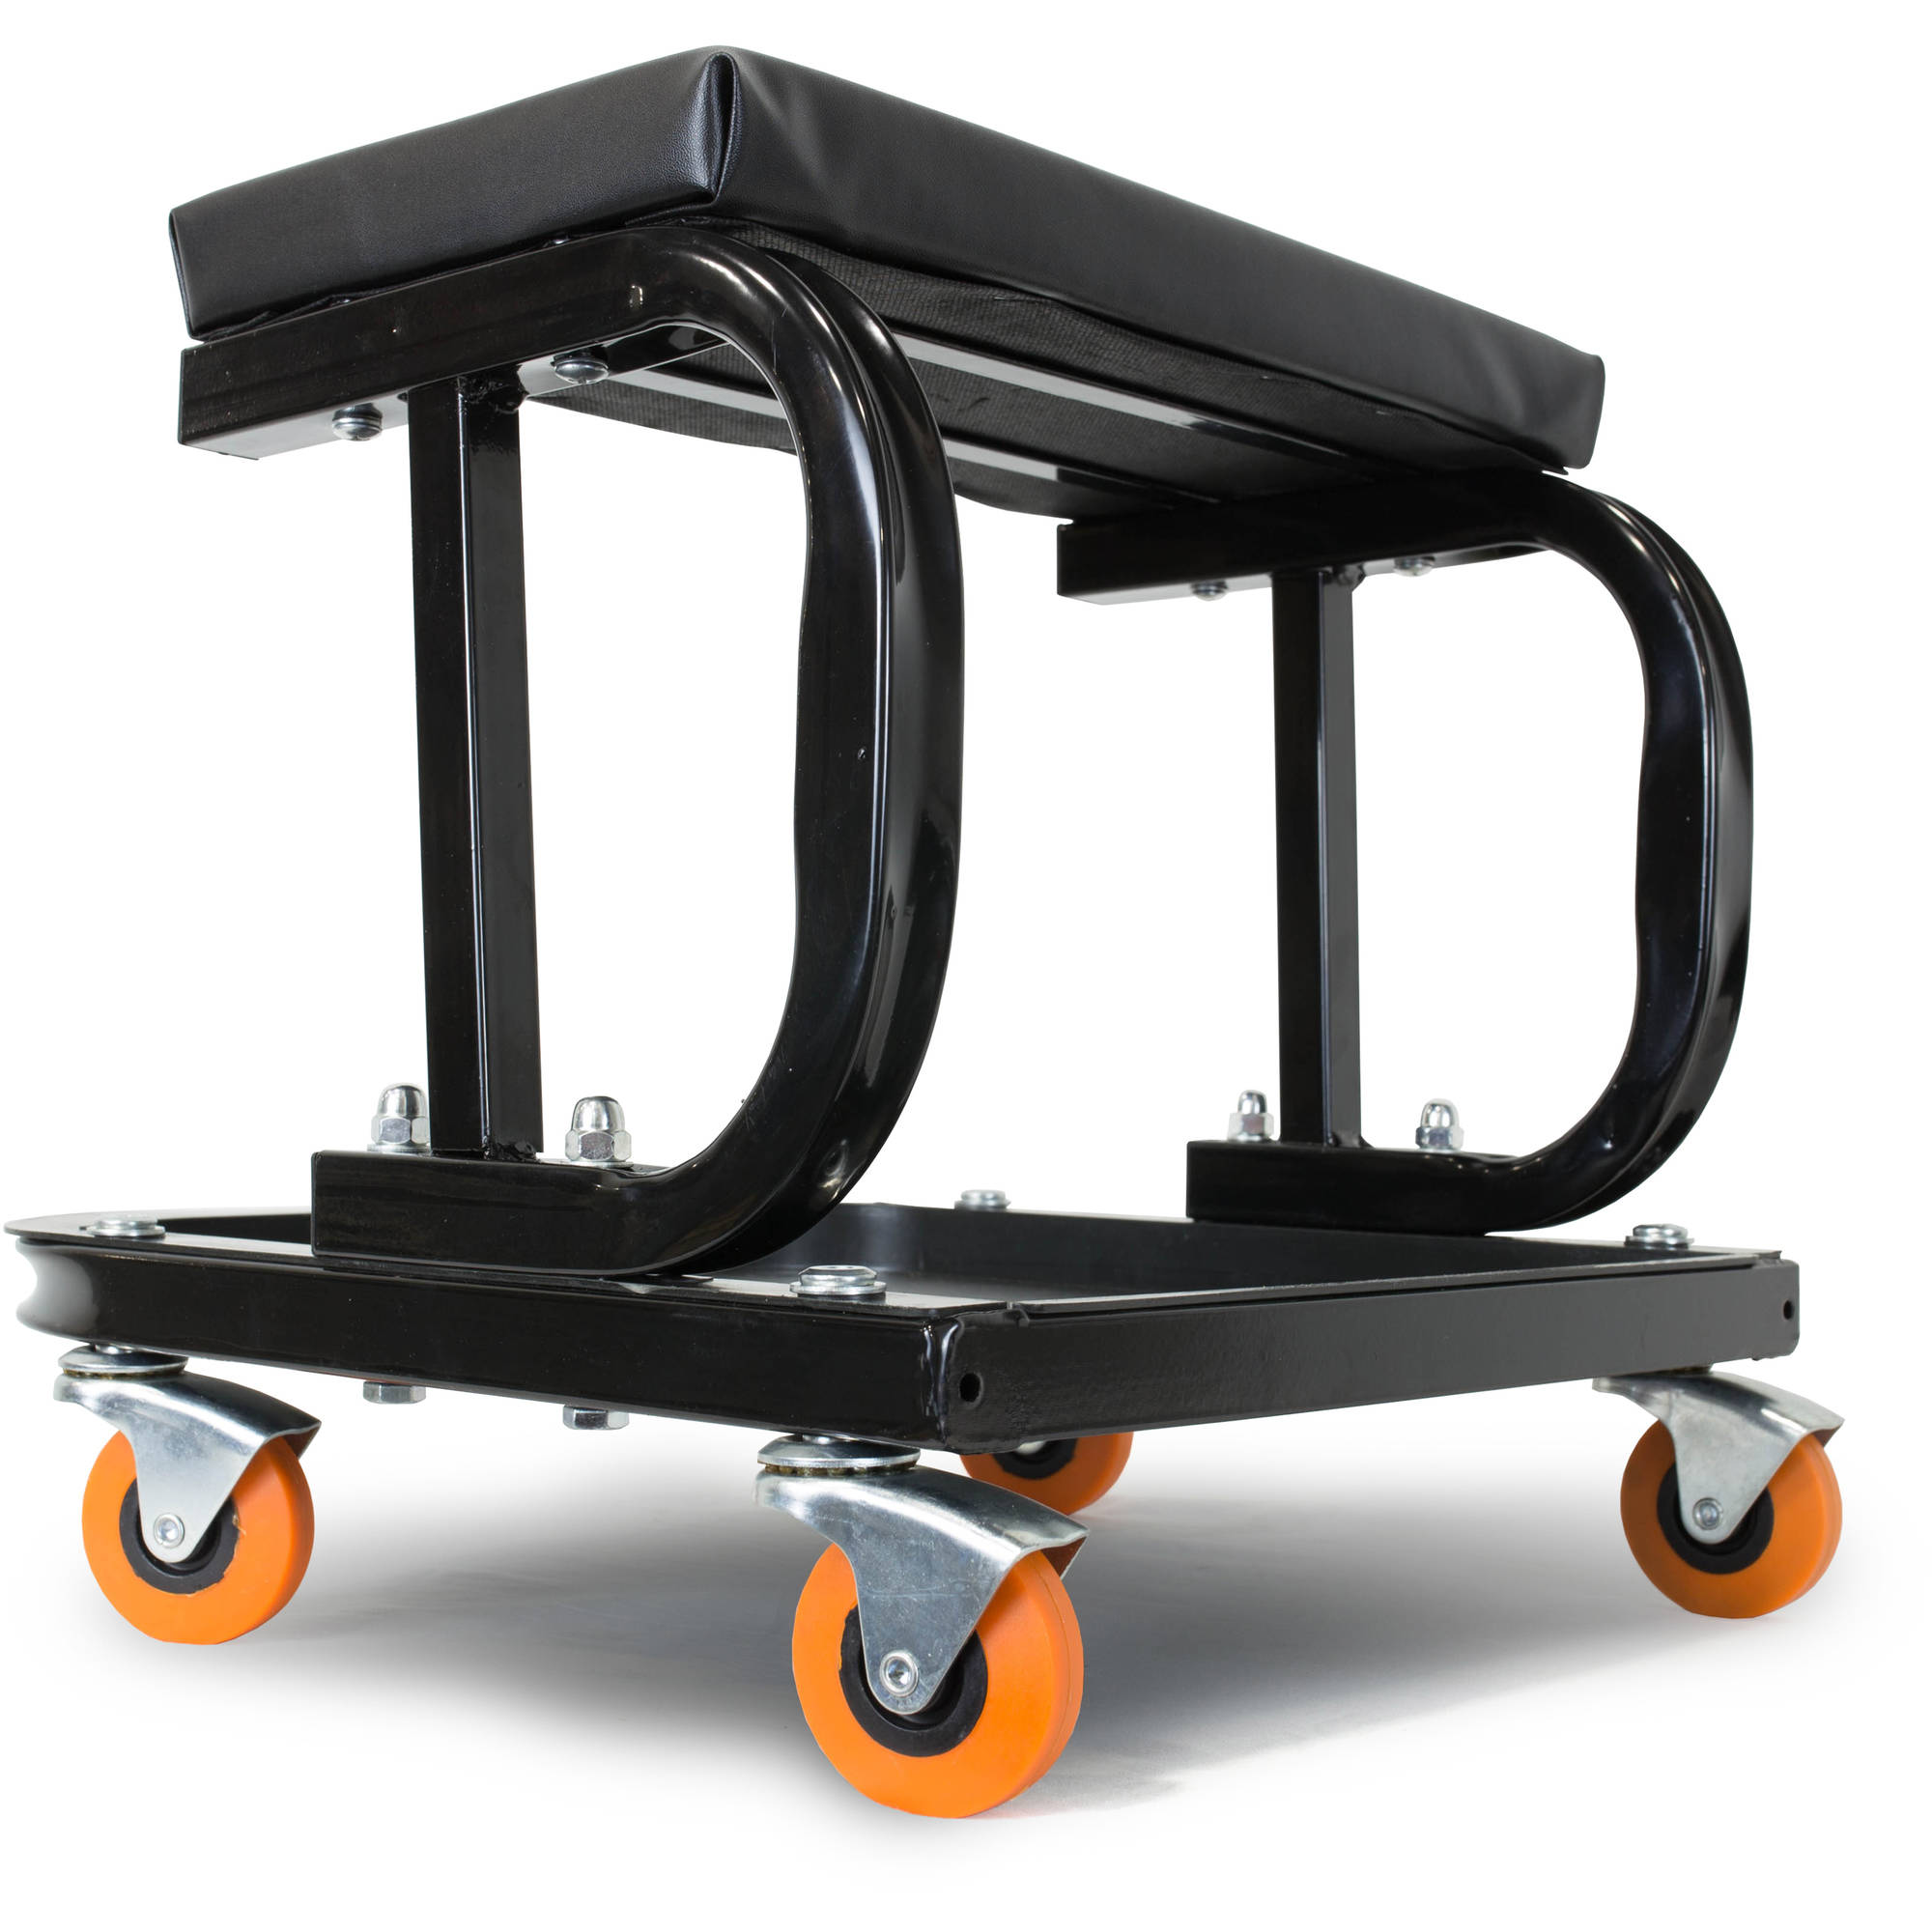 WEN 250-Pound Capacity Rolling Mechanic Seat with Onboard Storage, 73011 - image 3 of 4